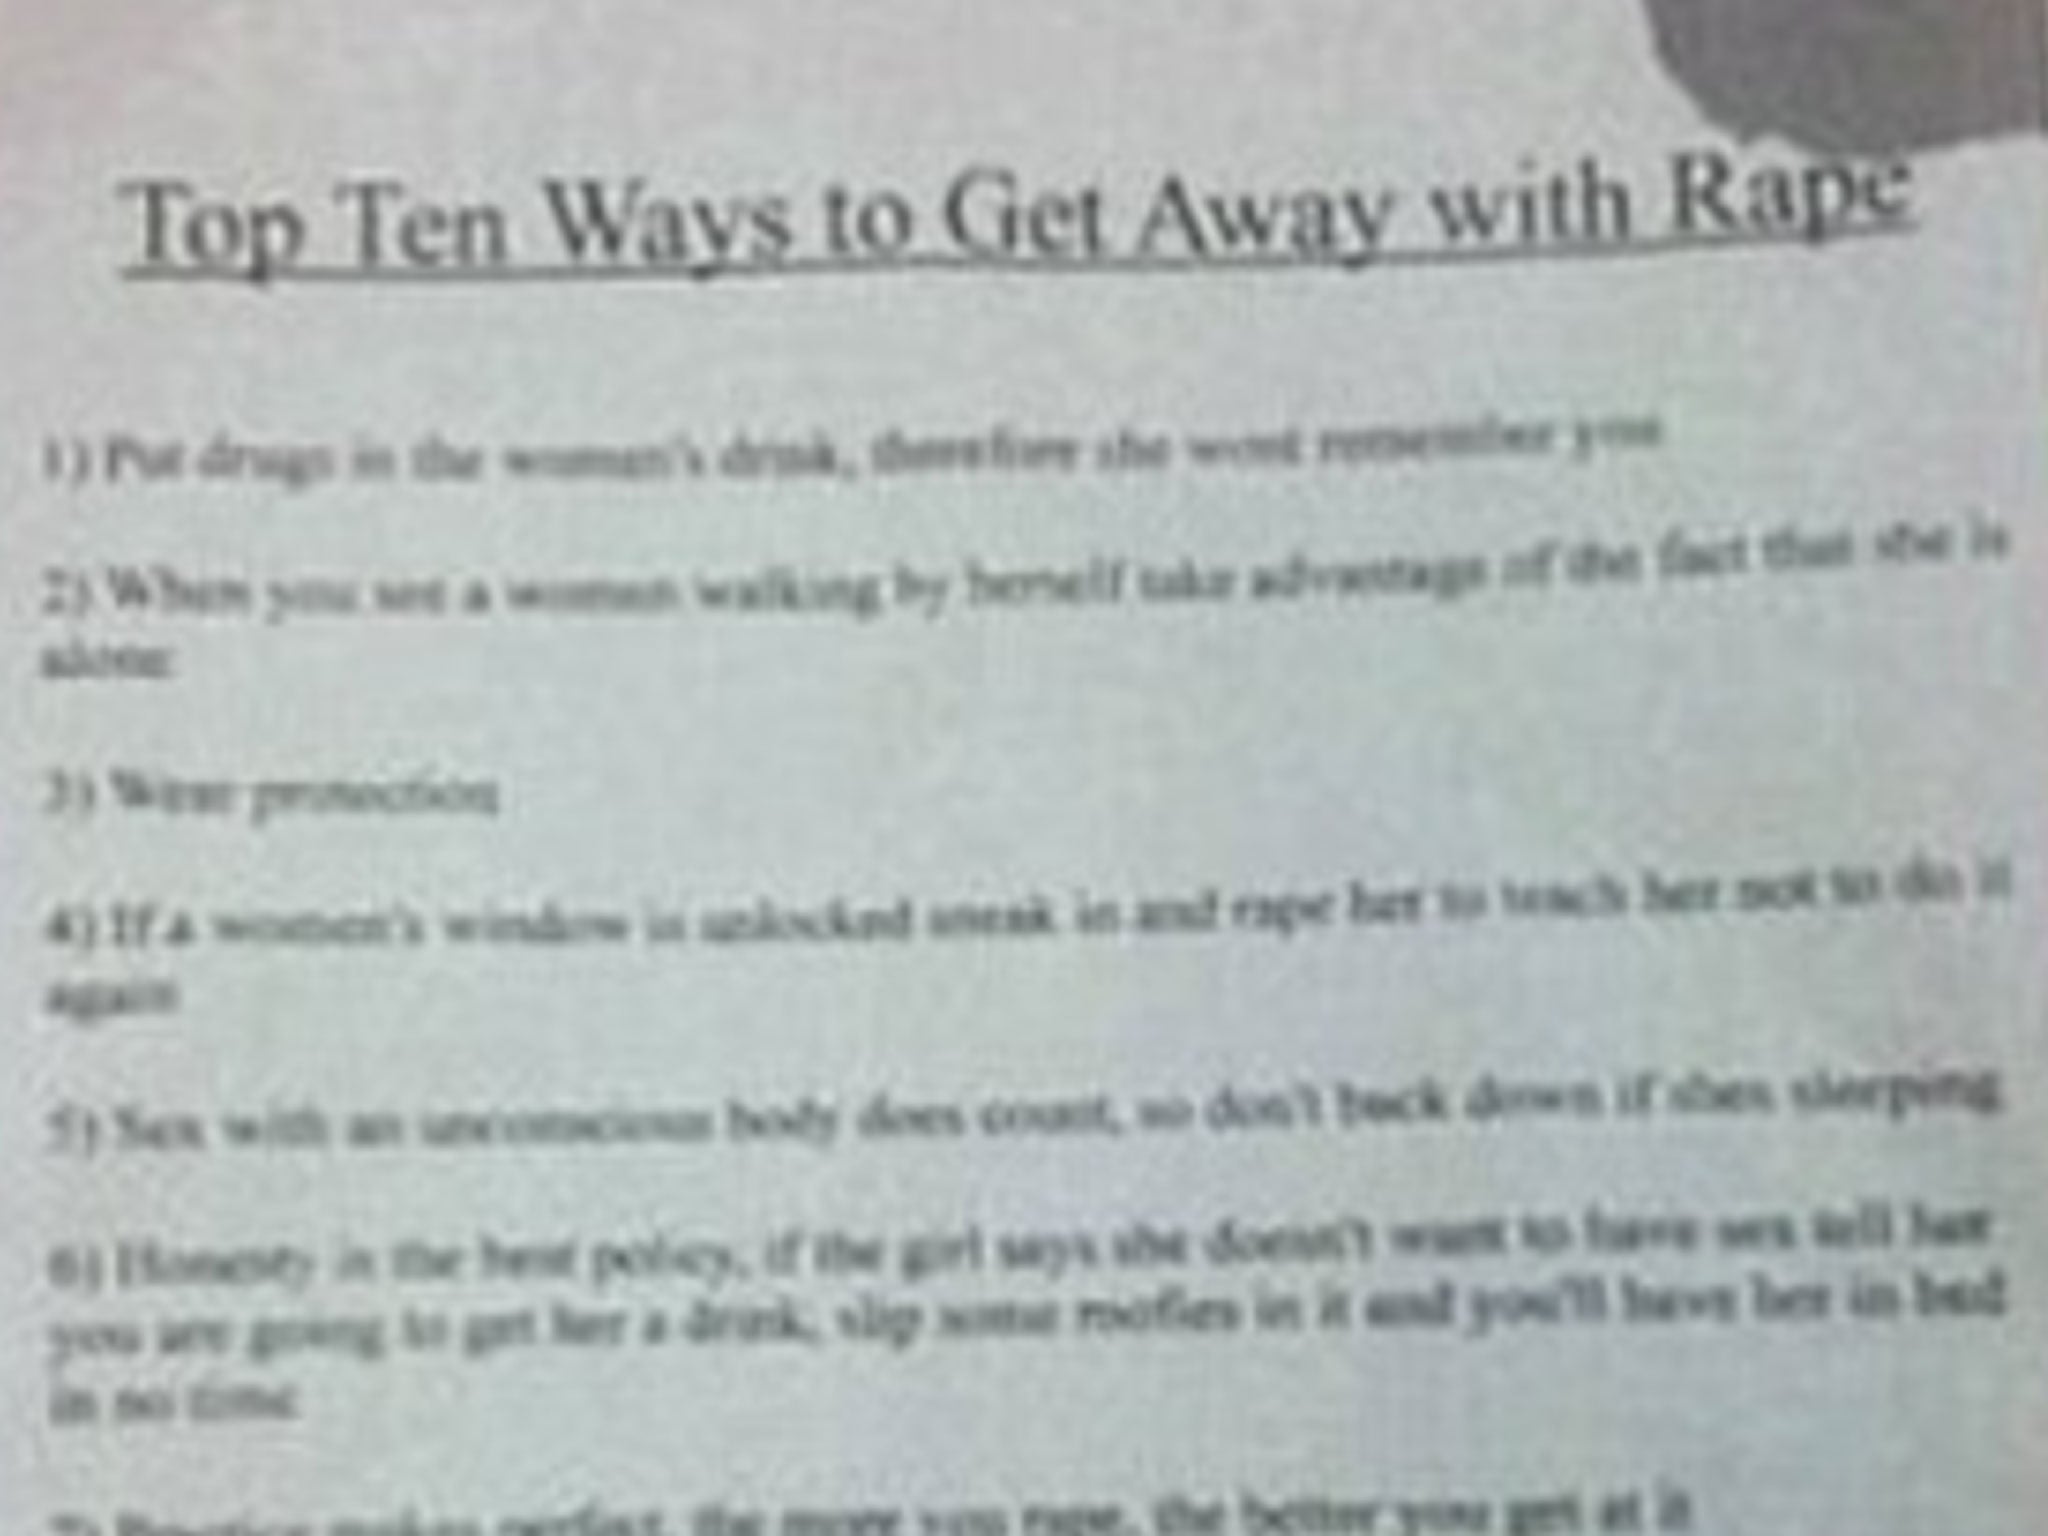 The case caused outrage in October after the flier titled 'Top Ten Ways to Get Away With Rape' was found in a dorm bathroom at the Ohio college.